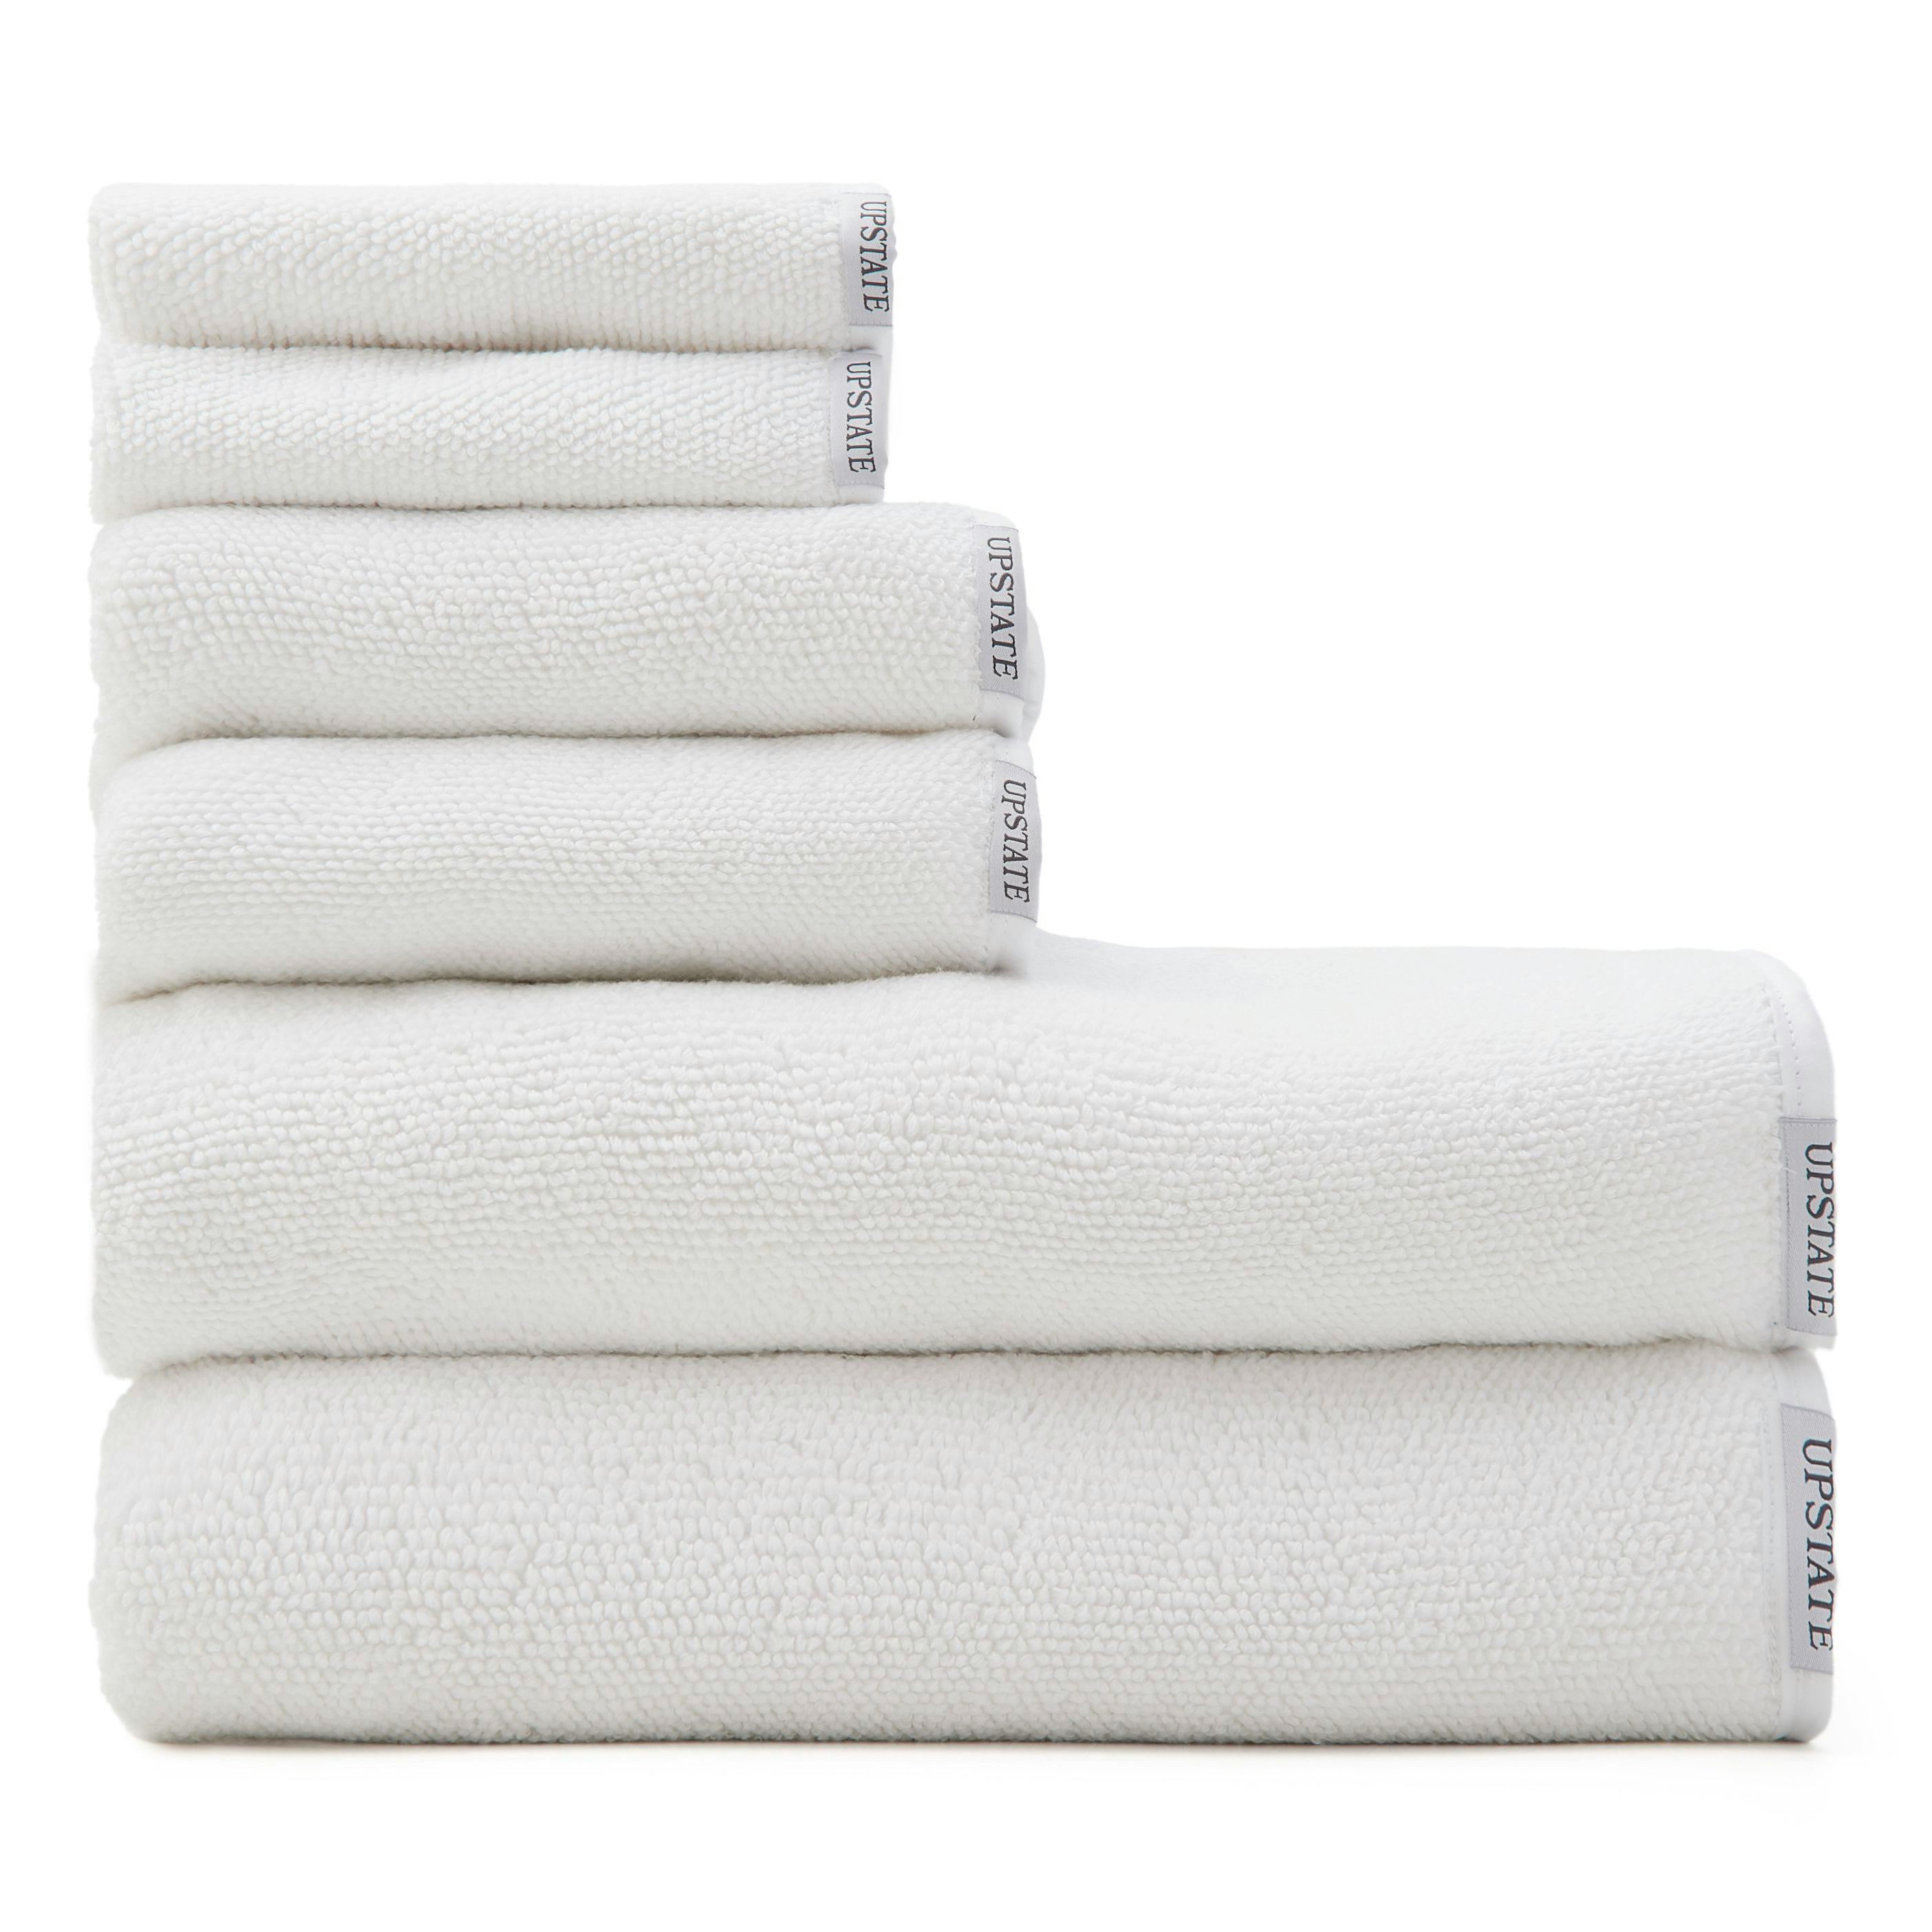 Premium Photo  Stack of fluffy towels in store background